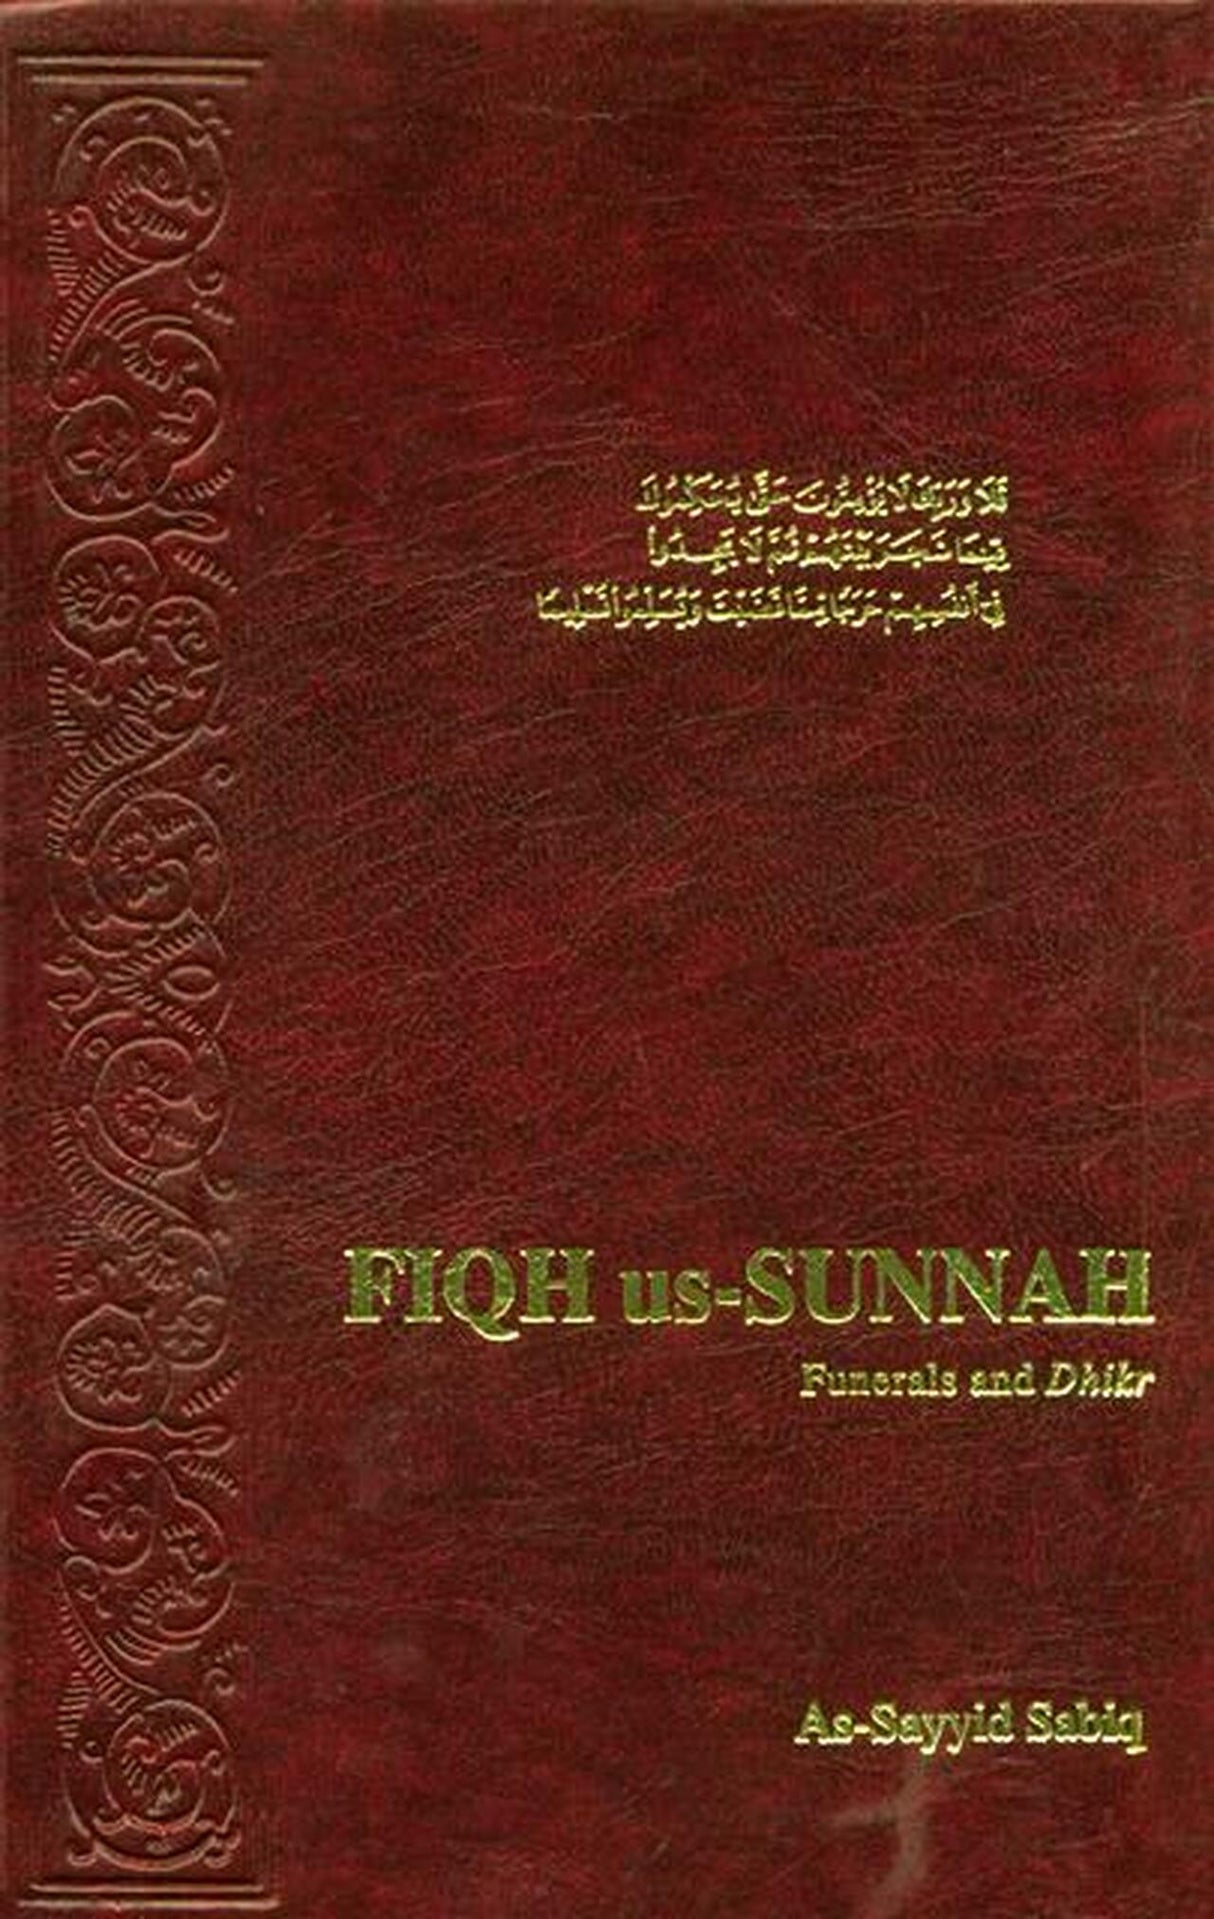 FIqh us Sunnah - Funerals and Dhikr (volume 4)